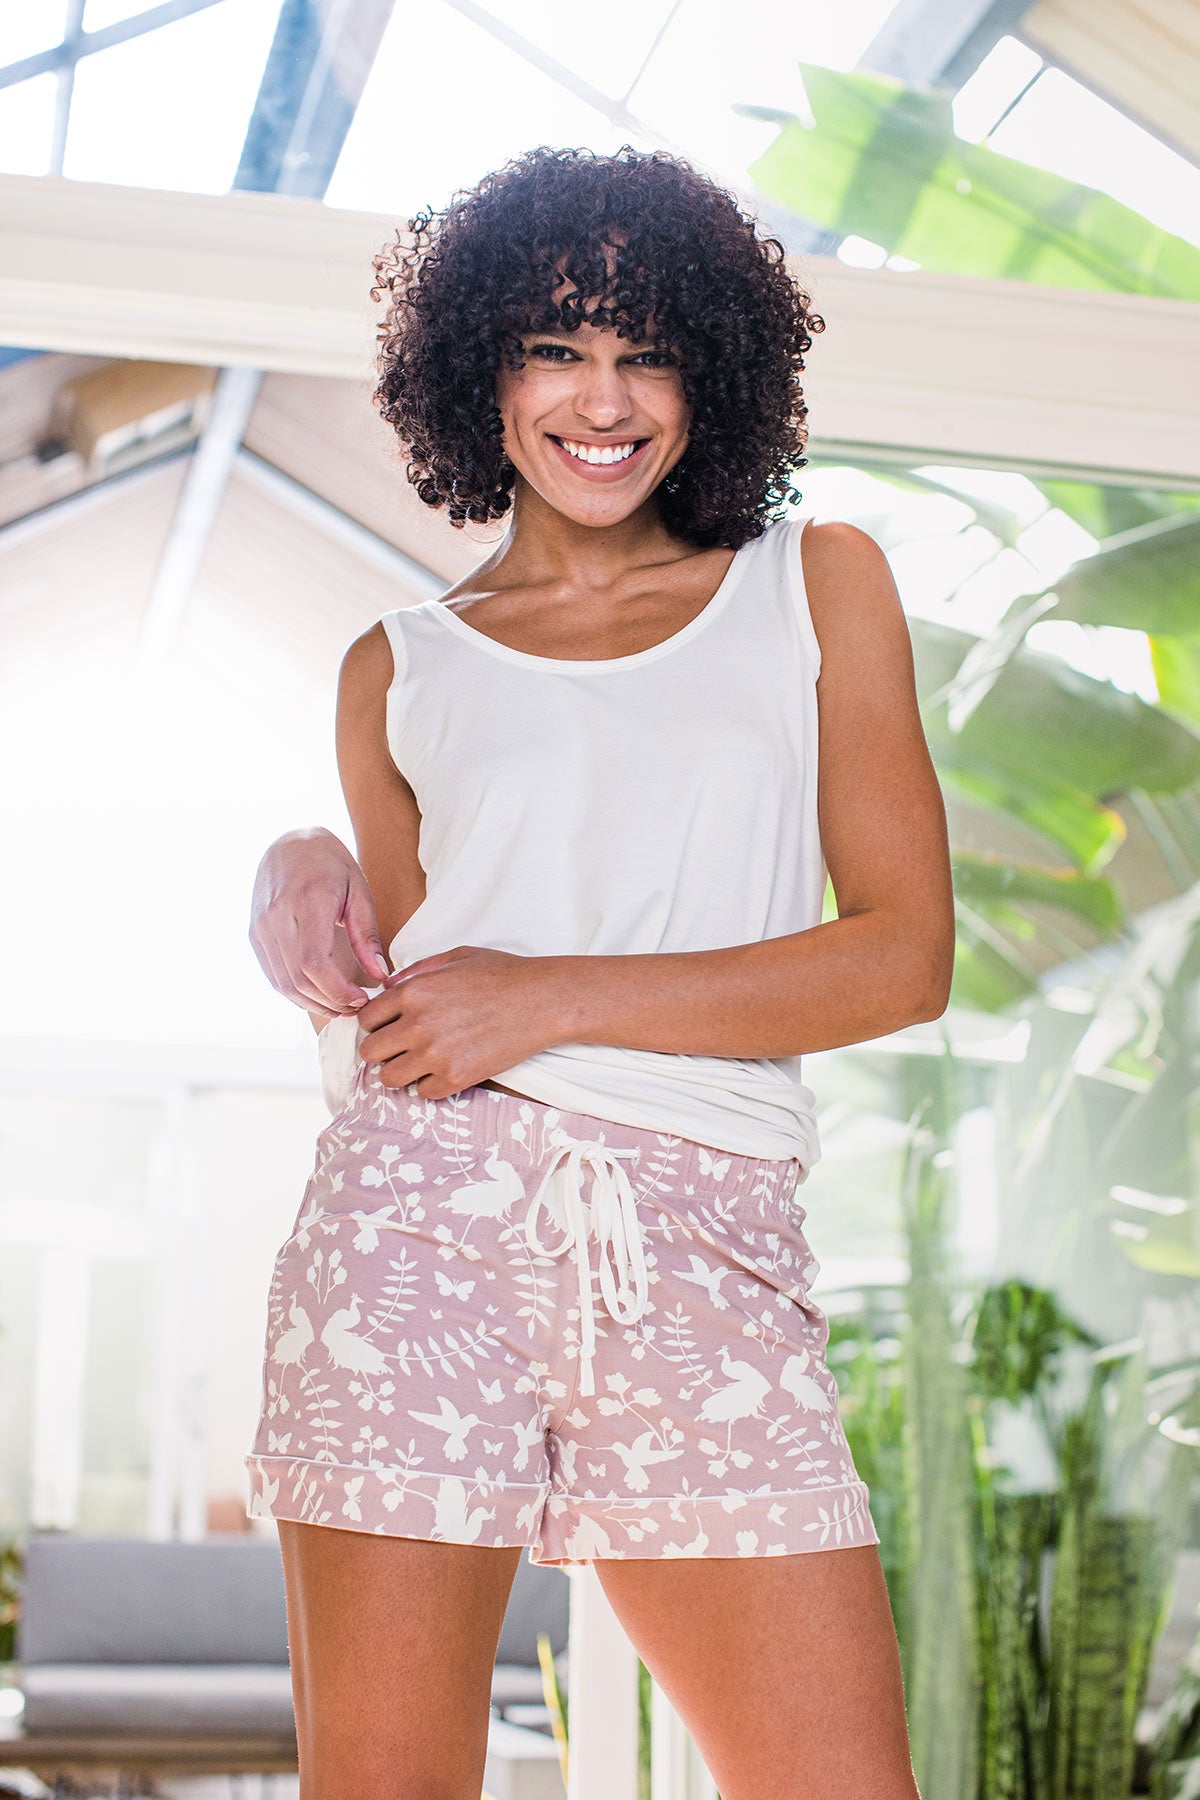 A woman standing and smiling with both hands holding the hem of her top, wearing Yala Lauren Piped Bamboo Pajama Shorts in Secret Garden